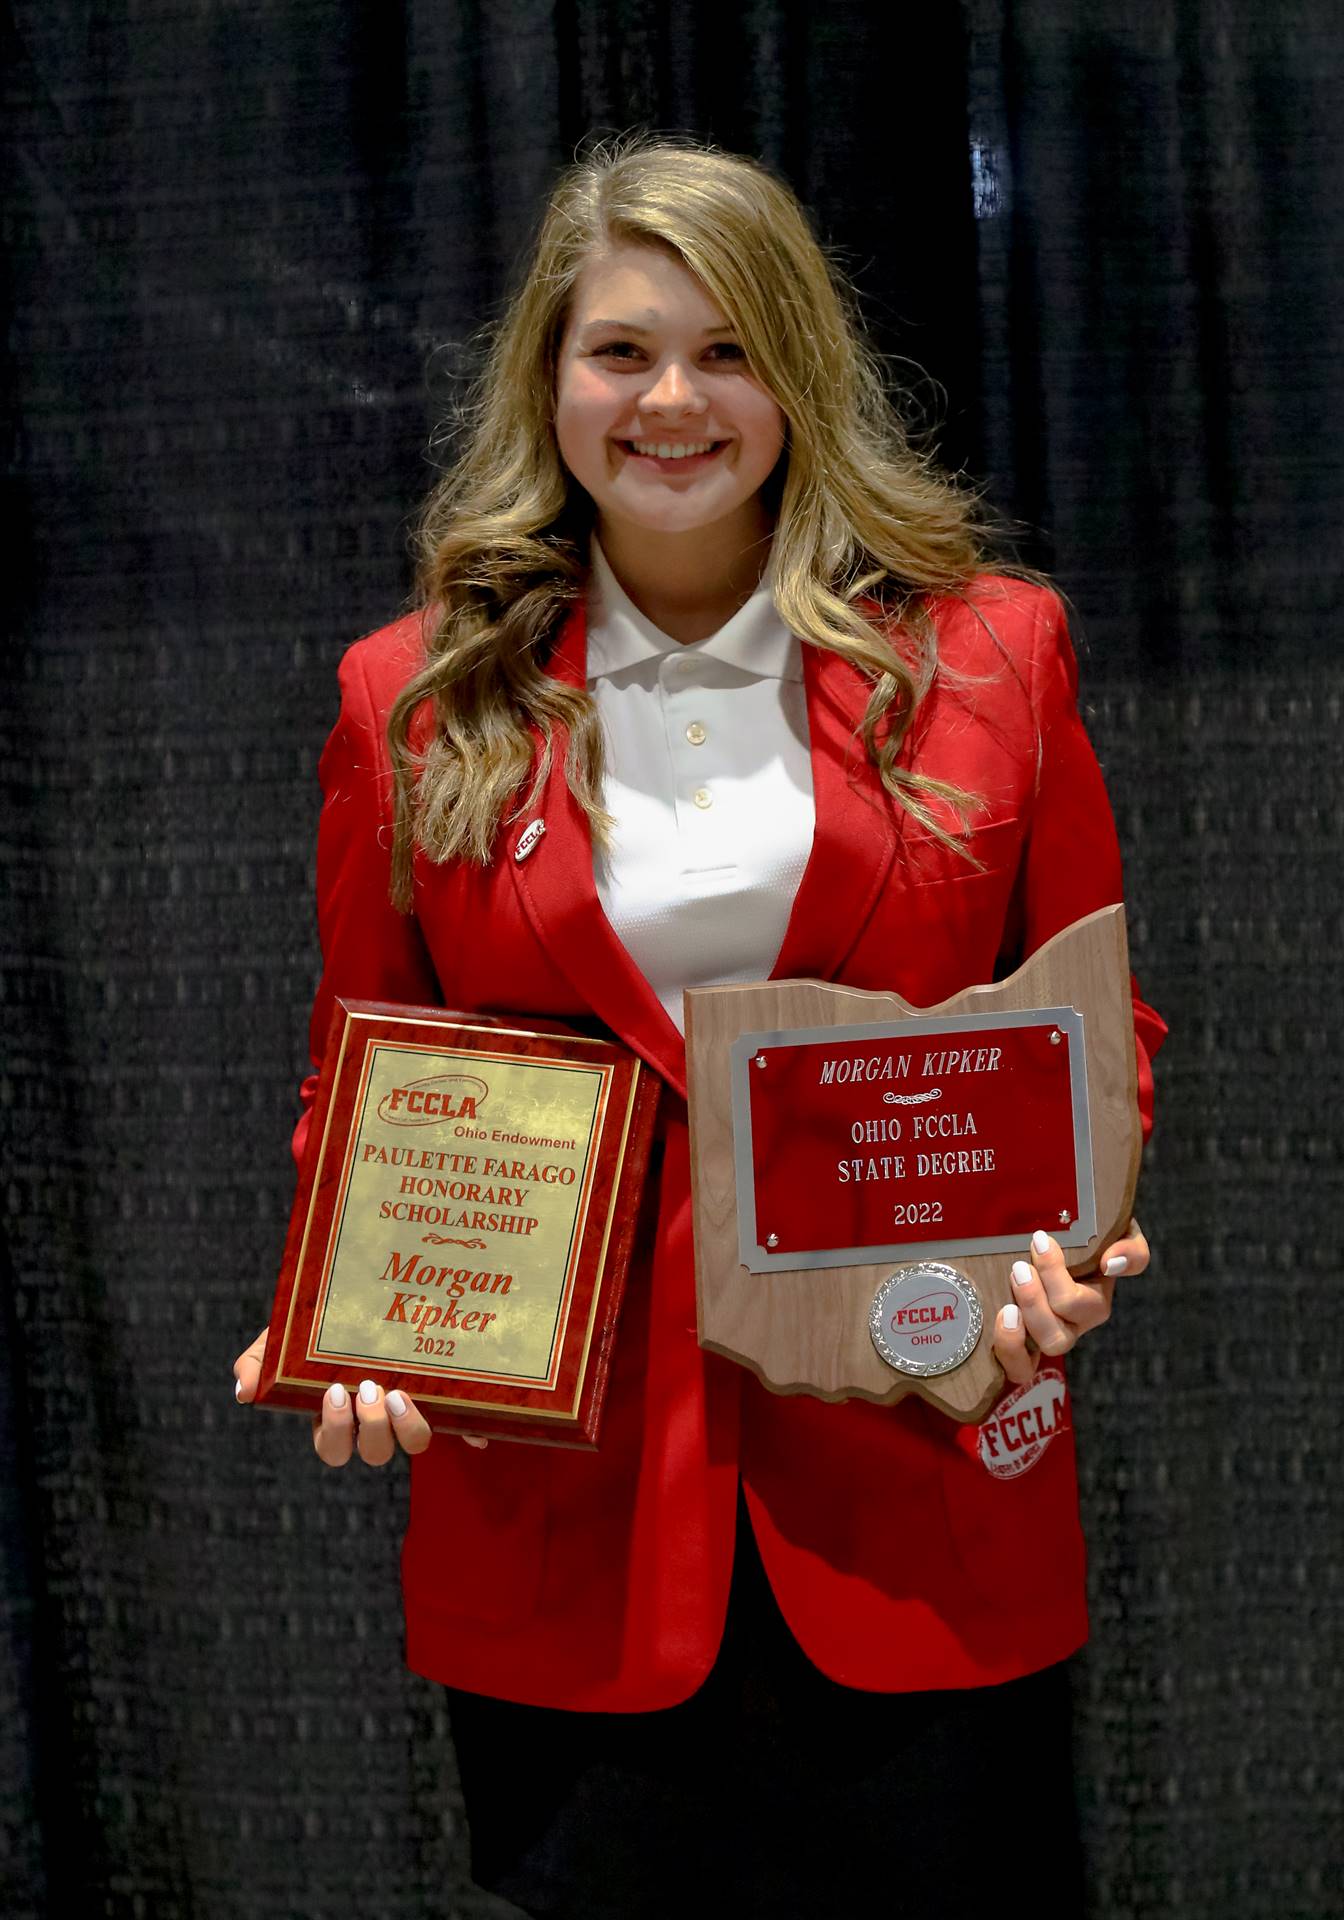 FCCLA Girl with Trophy and Plaque